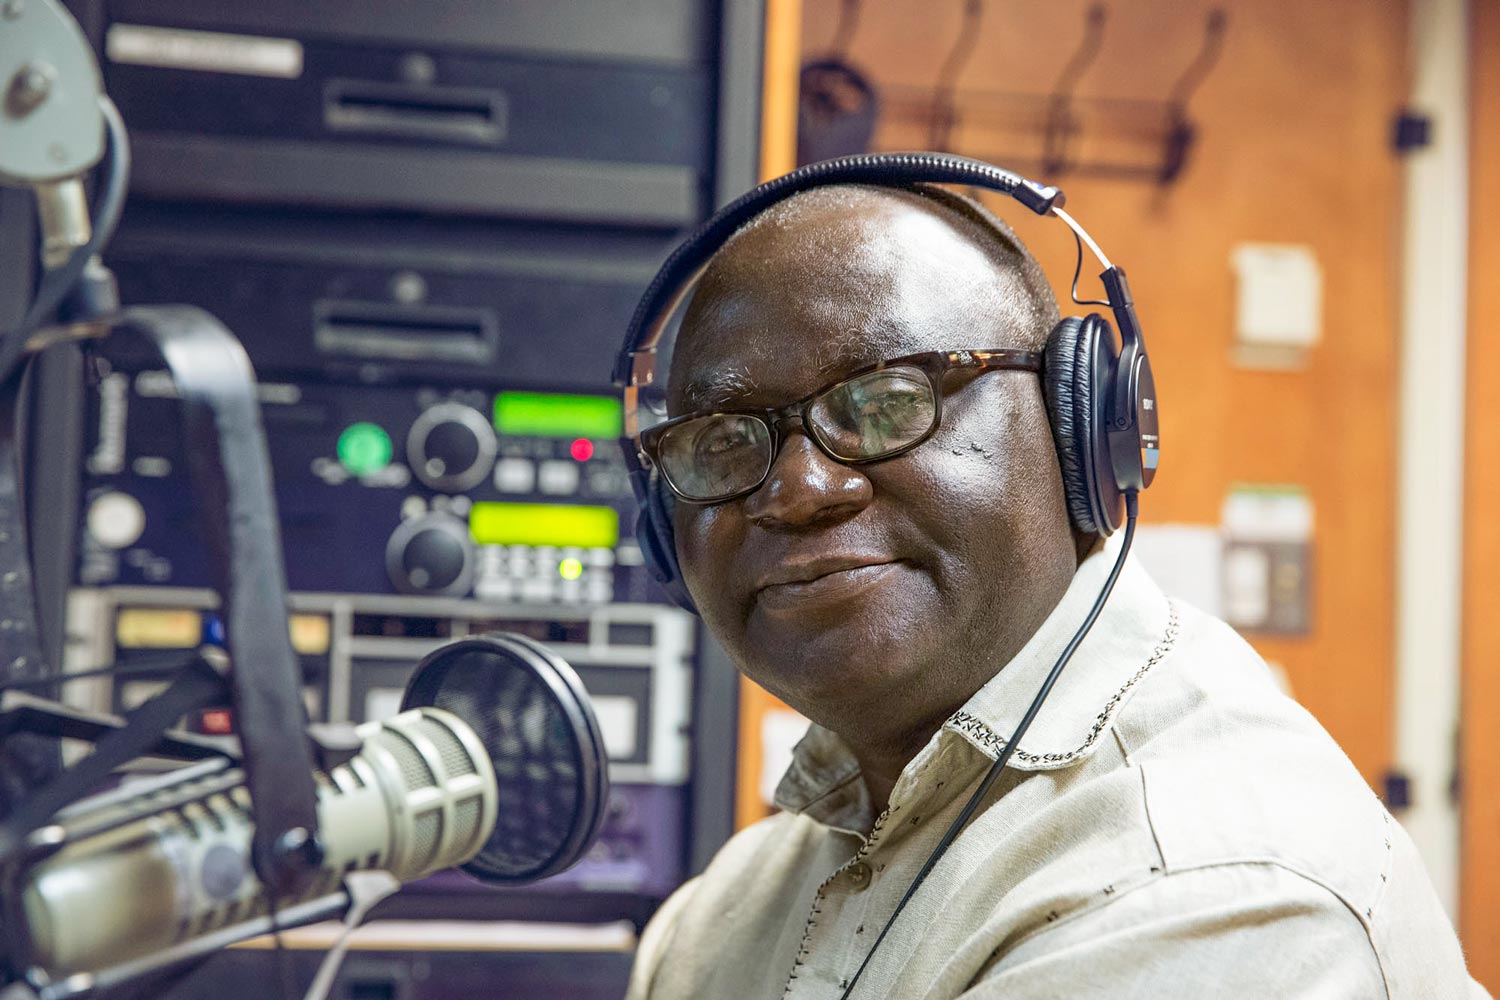 Kwesi Ghartey-Tagoe smiling at the camera in front of a microphone wearing headphones